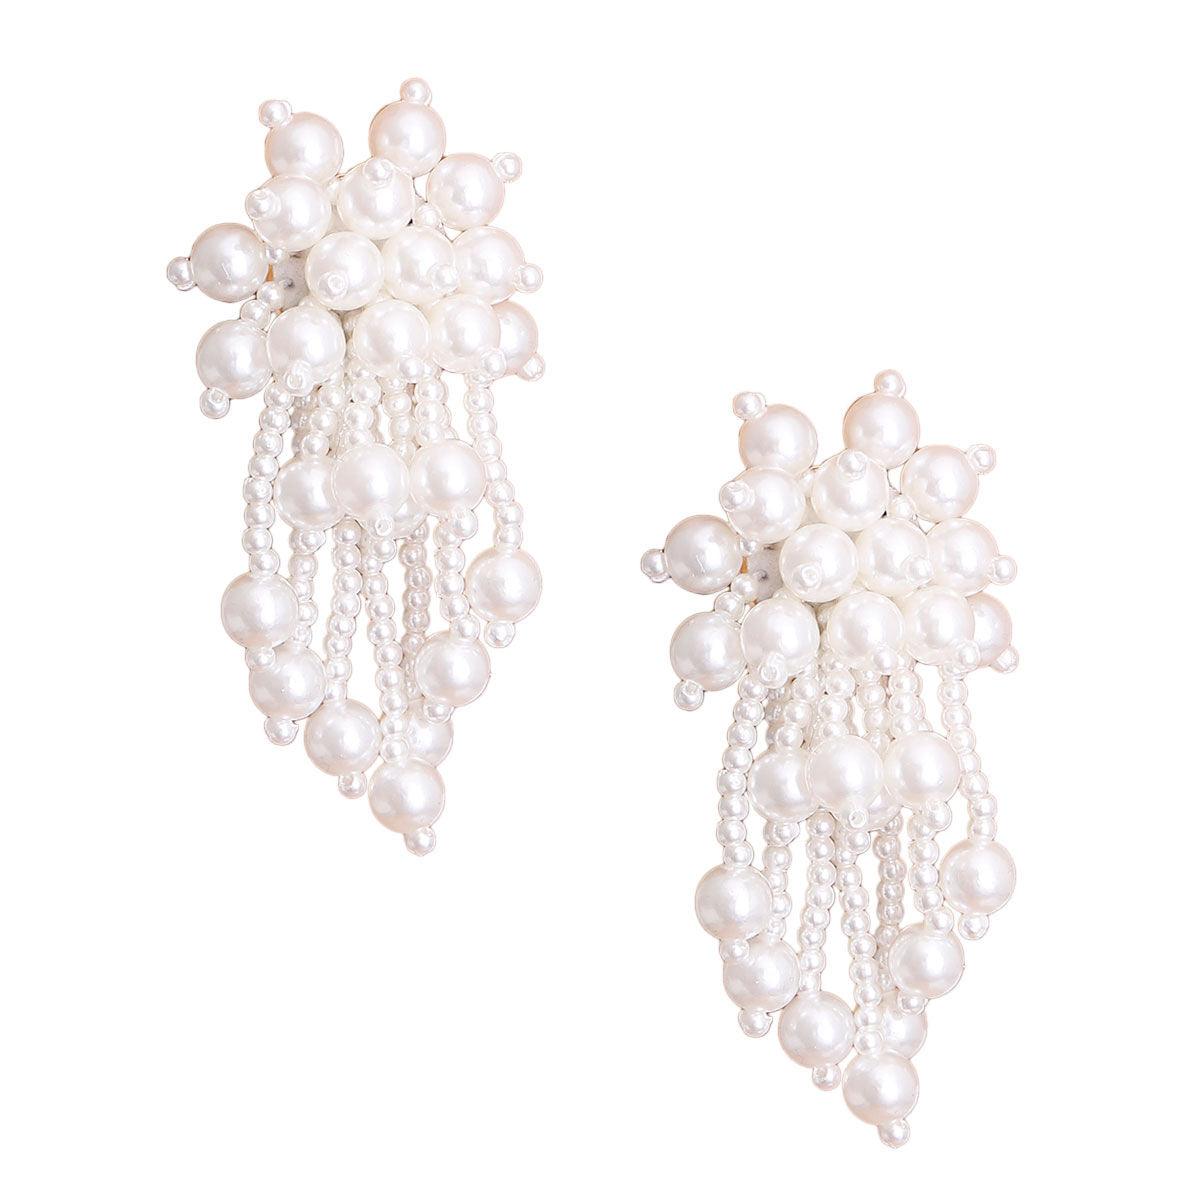 Chic Cream Cluster Drop Pearl Earrings - Make a Bold Statement with Timeless Elegance